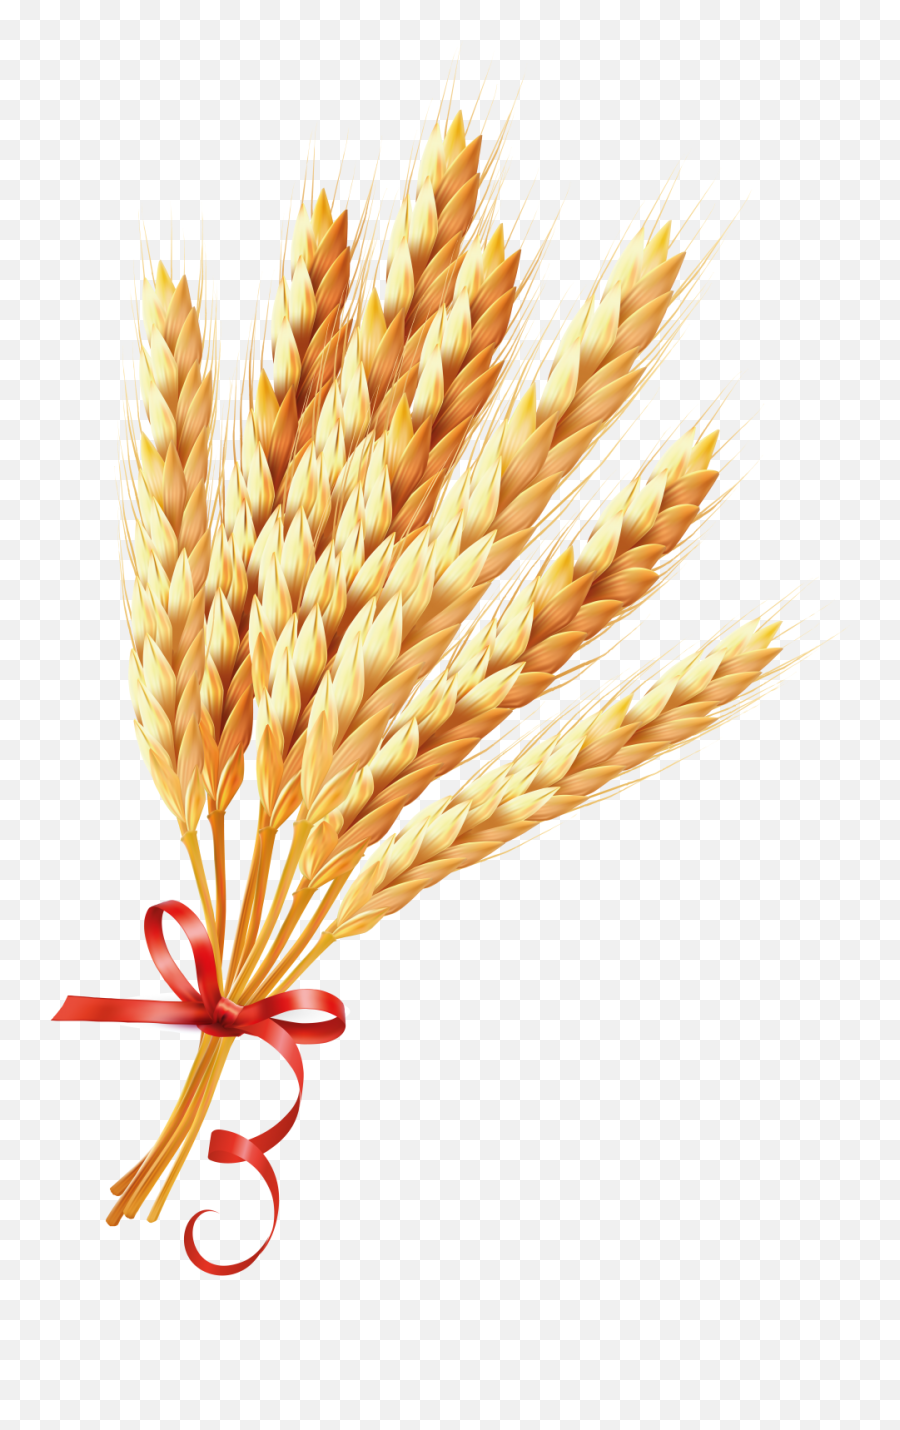 Wheat Png Image - Transparent Wheat Png,Wheat Transparent